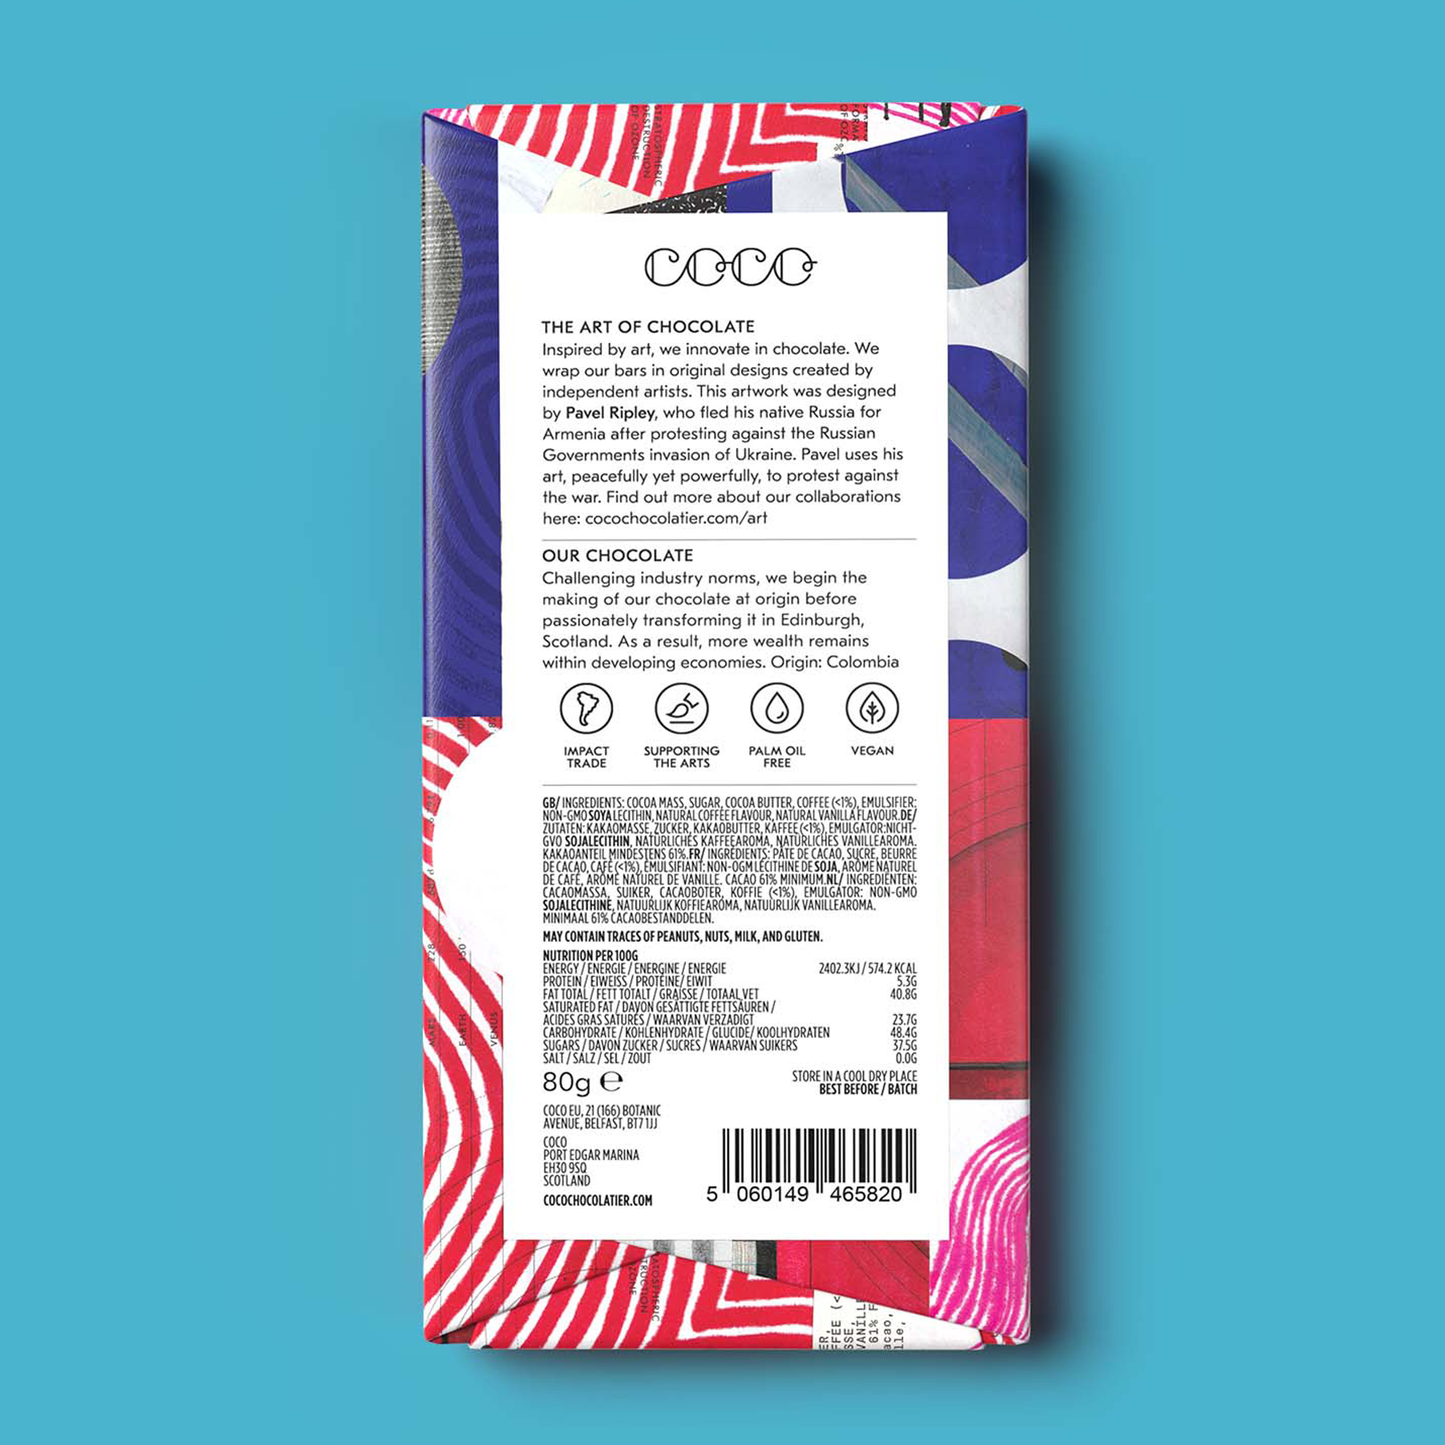 Cold Brew Coffee Dark Chocolate Bar from Coco